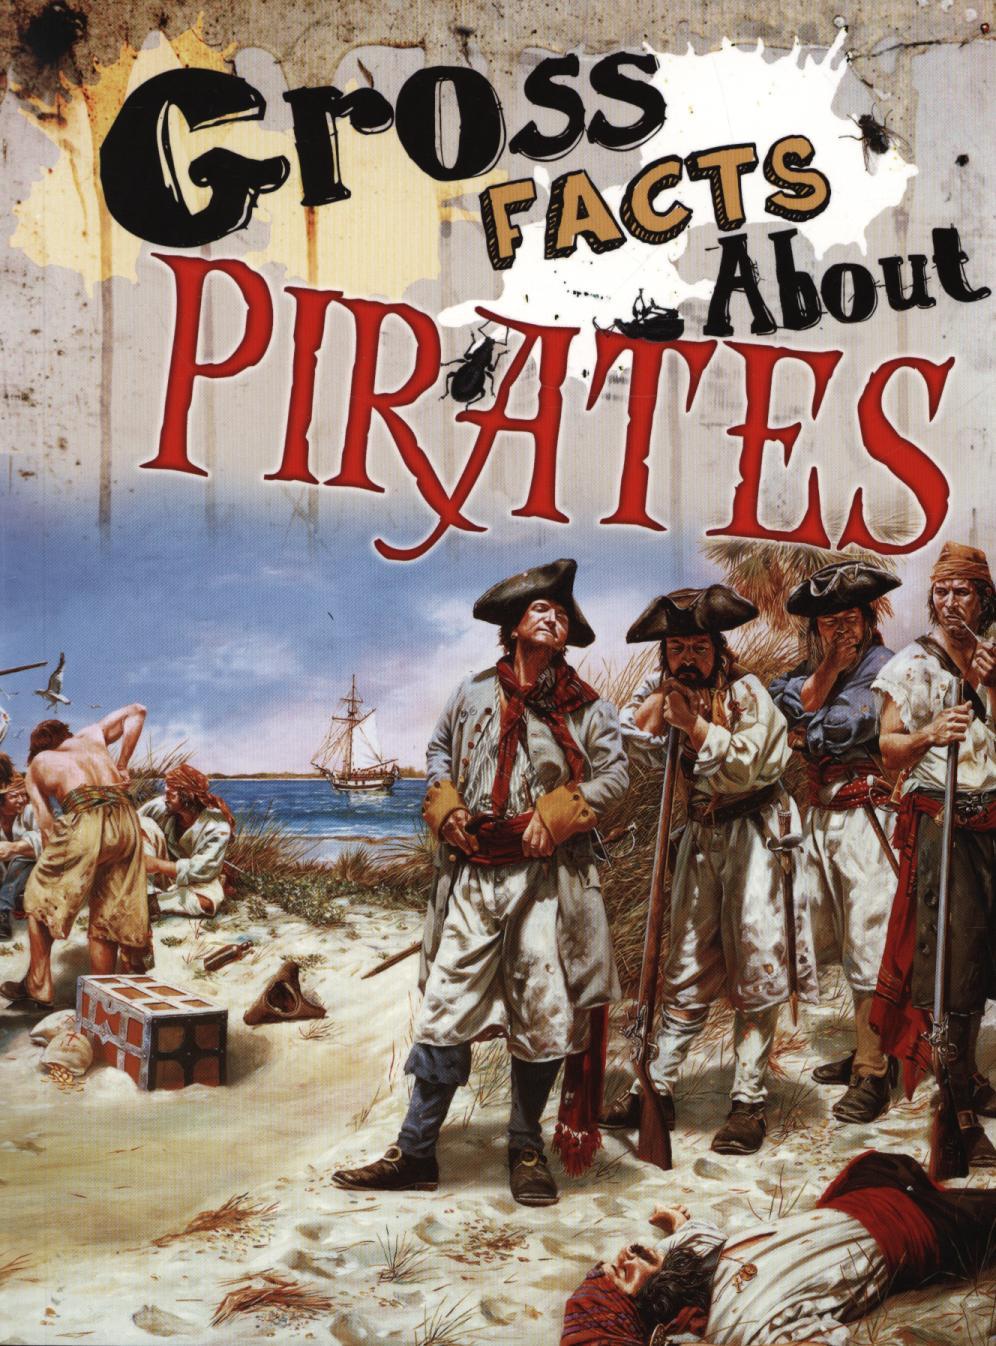 Gross Facts About Pirates - Mira Vonne